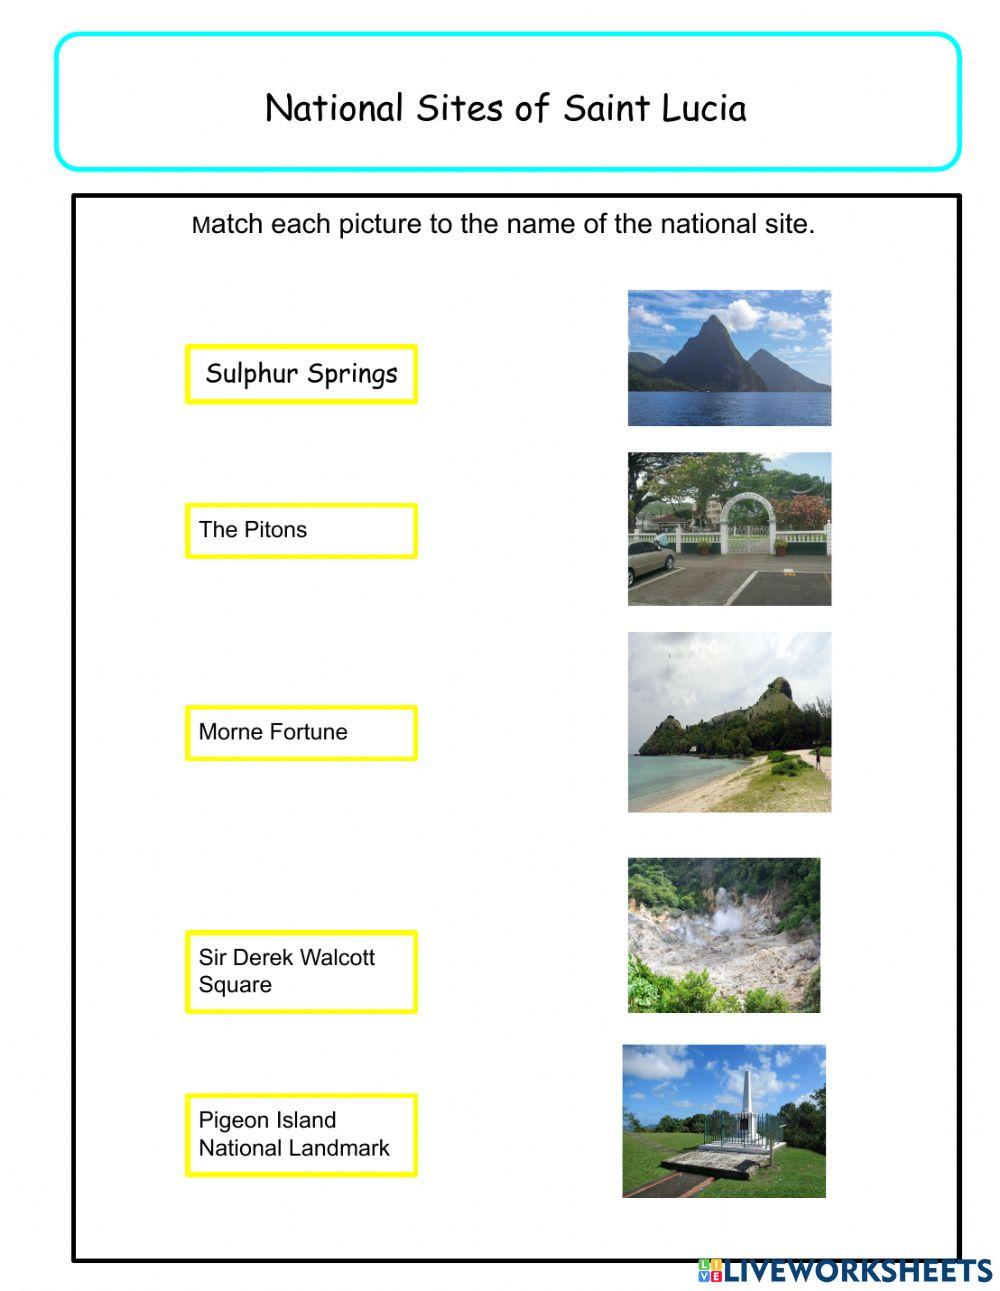 National Sites of Saint Lucia